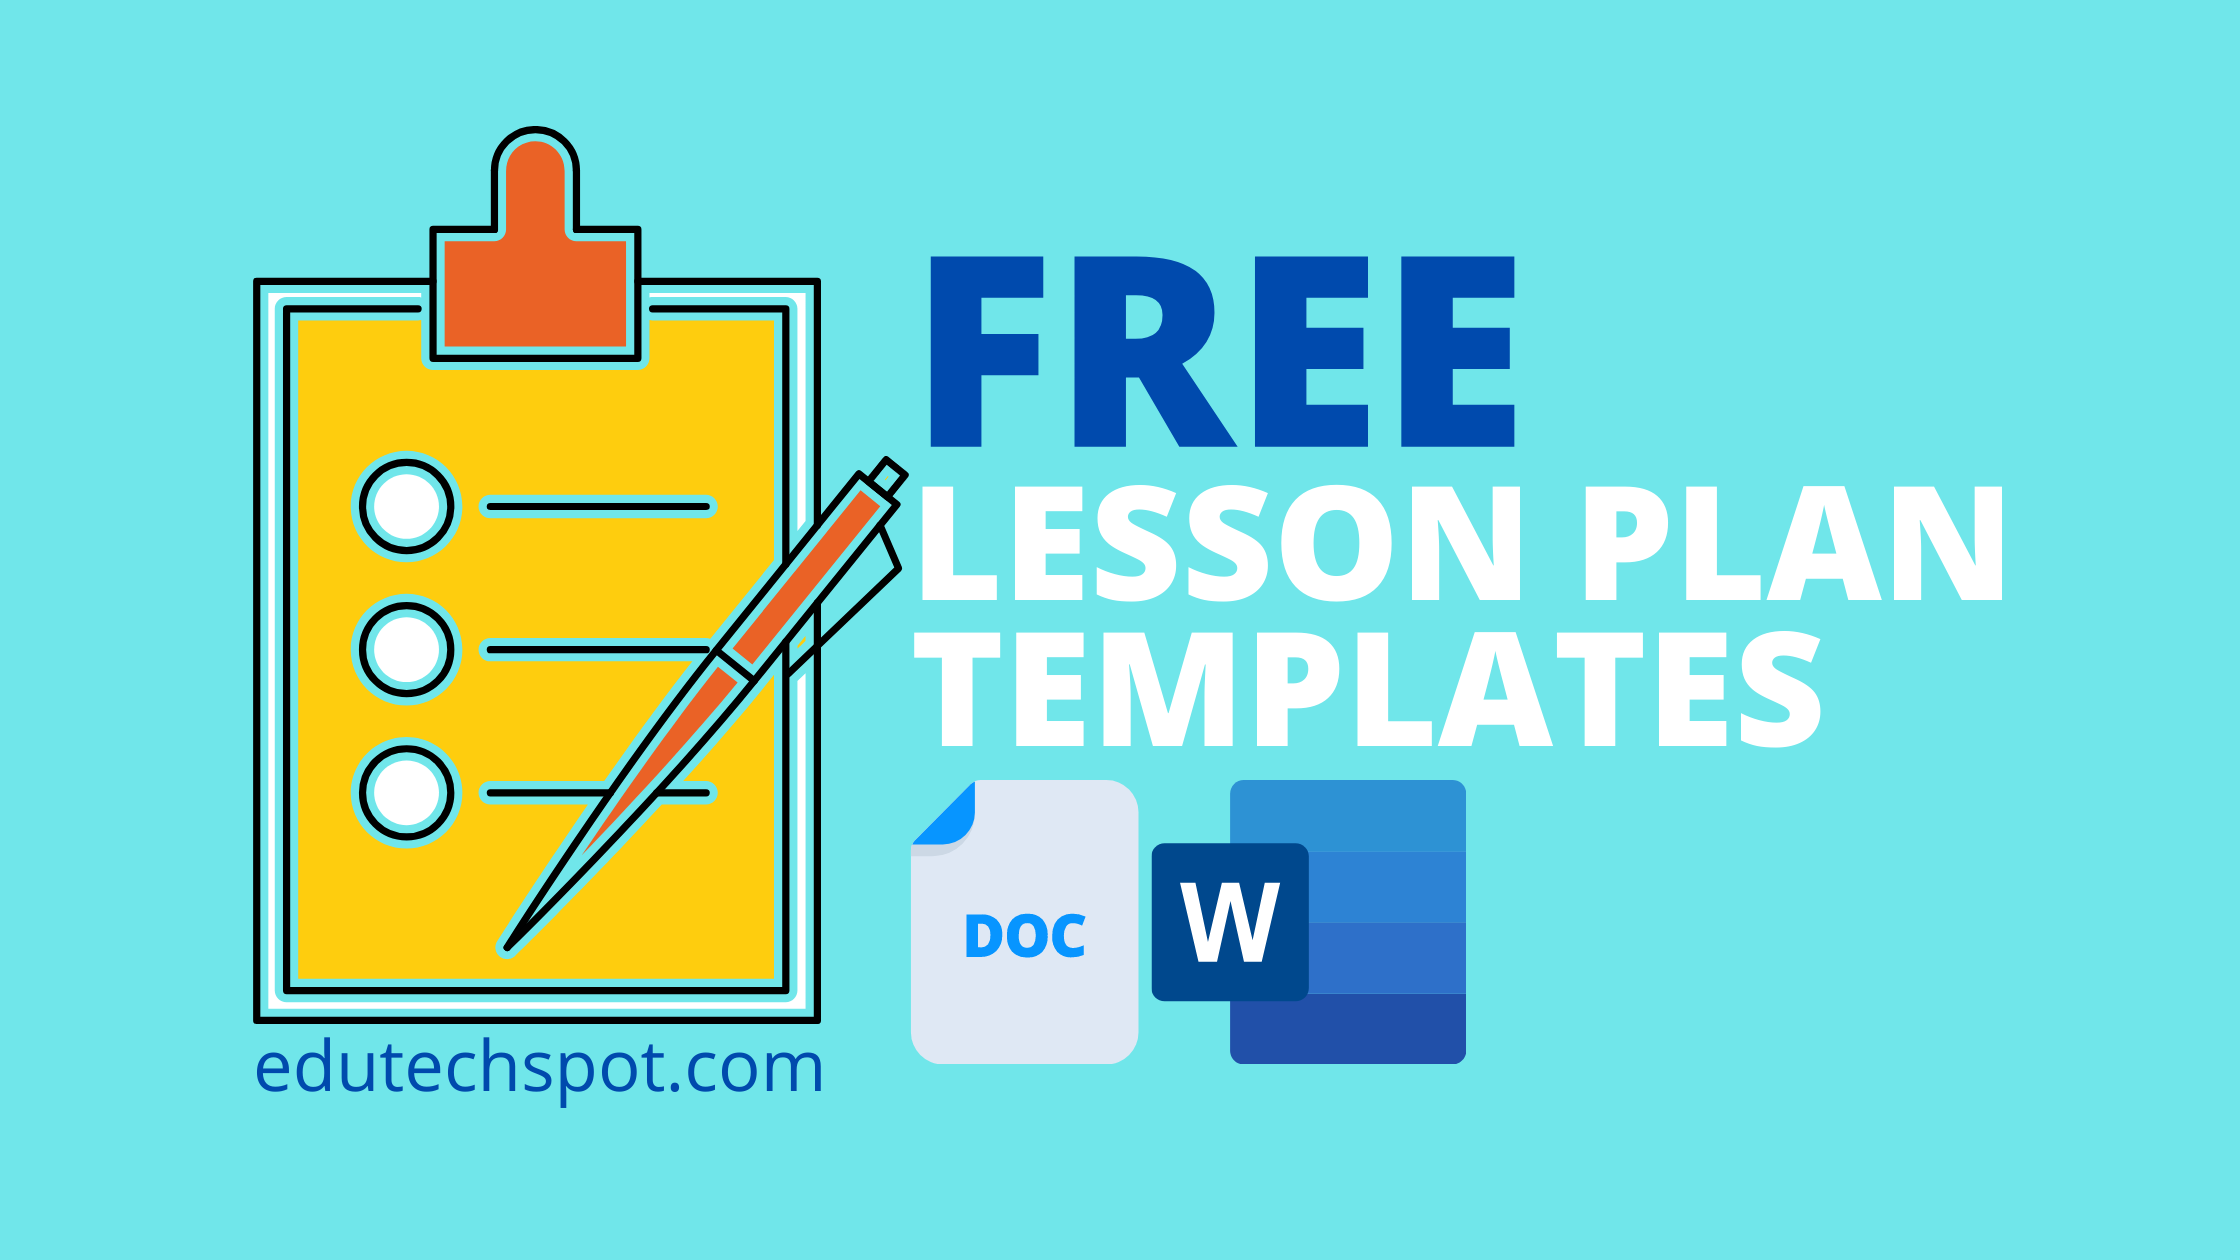 Lesson Plan Templates for Google Docs Users